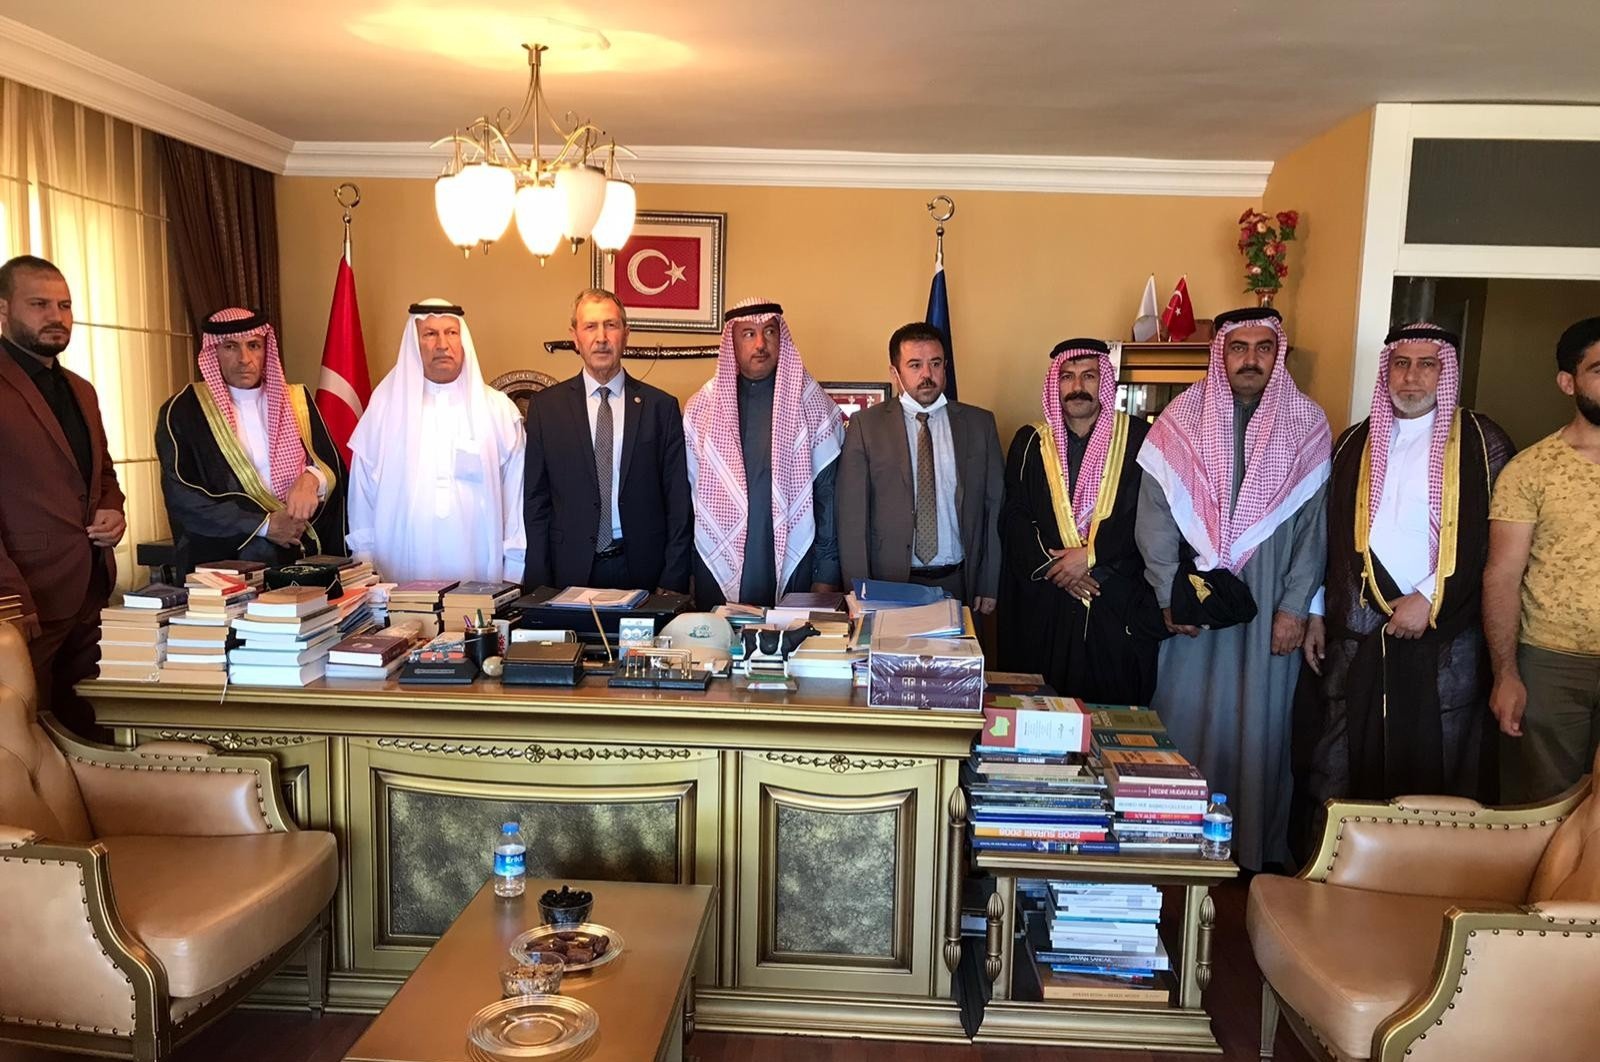 Former Justice and Development Party (AK Party) lawmaker Mahmut Kaplan (C) with Syrian tribe leaders in the capital Ankara, Aug. 15, 2020. (IHA Photo)